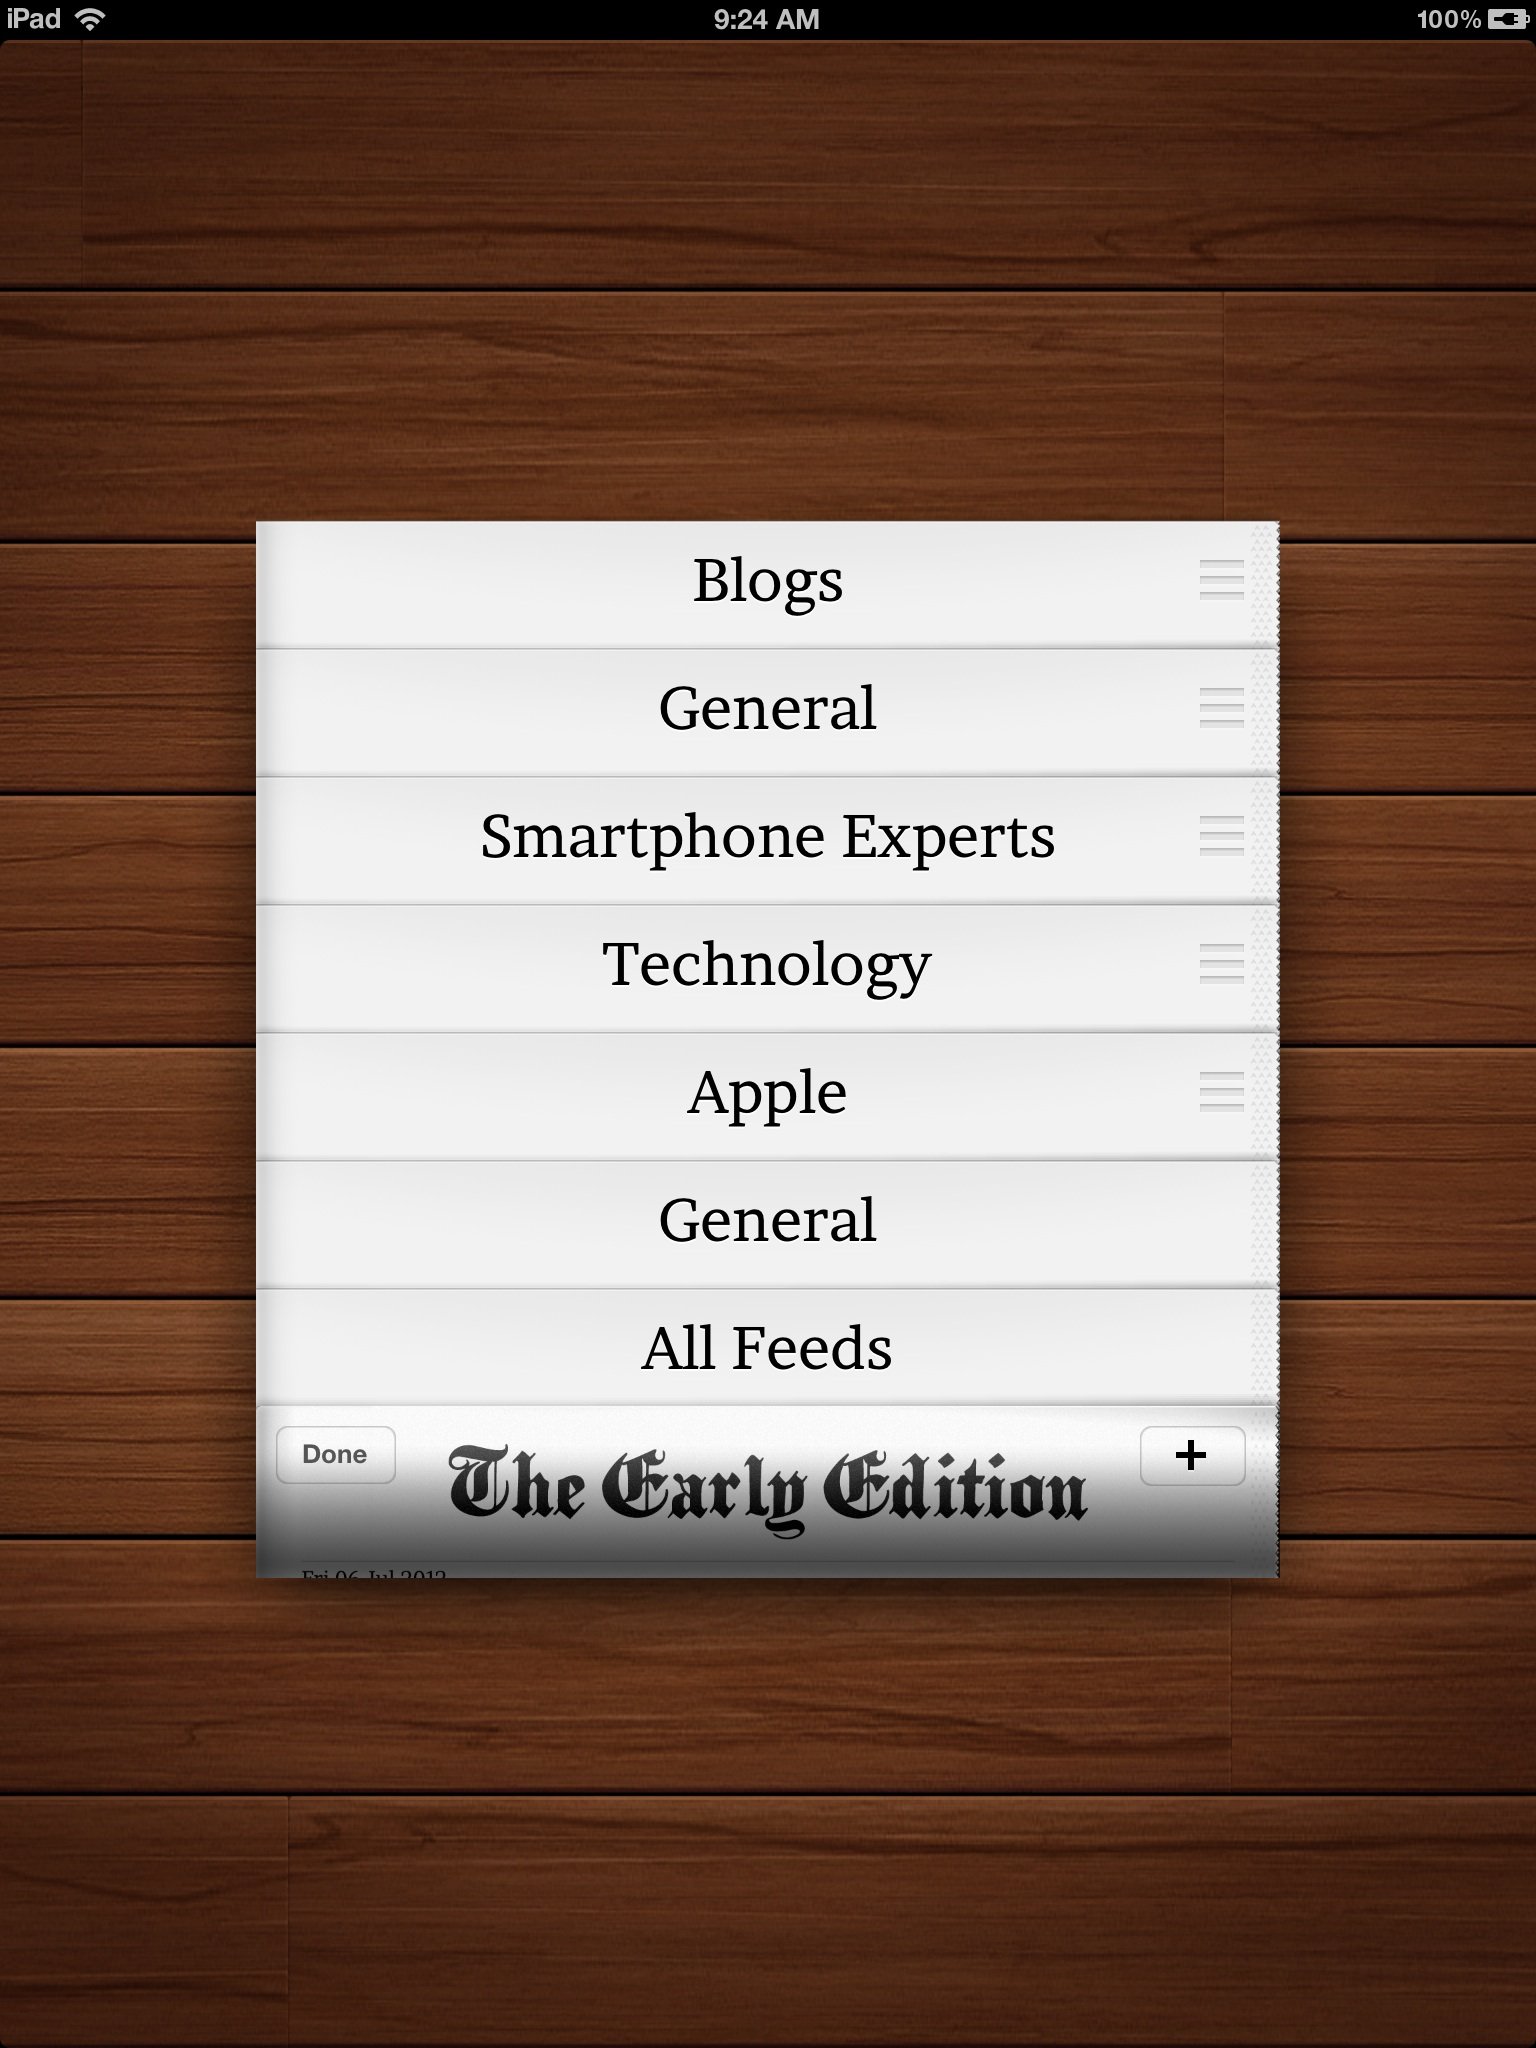 Early Edition 2 for iPad interface 2